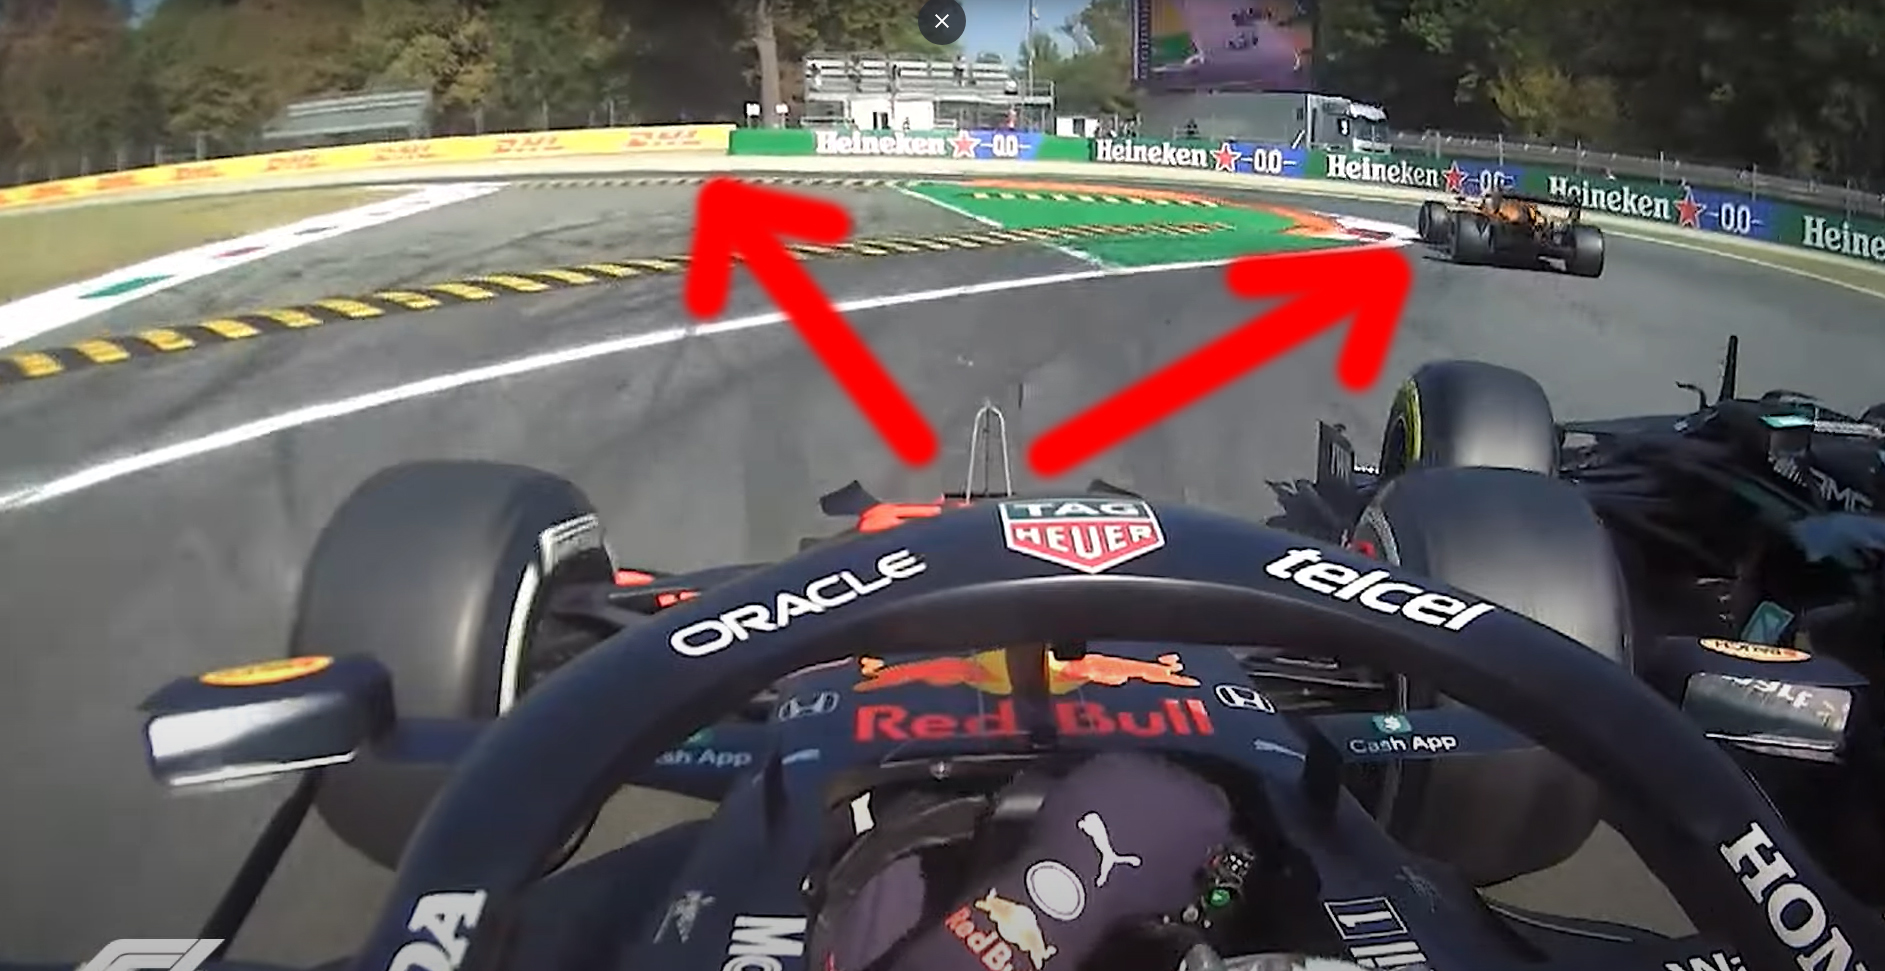 Hamilton says Verstappen ‘obviously knew he wasn’t going to make the corner’ after Monza crash